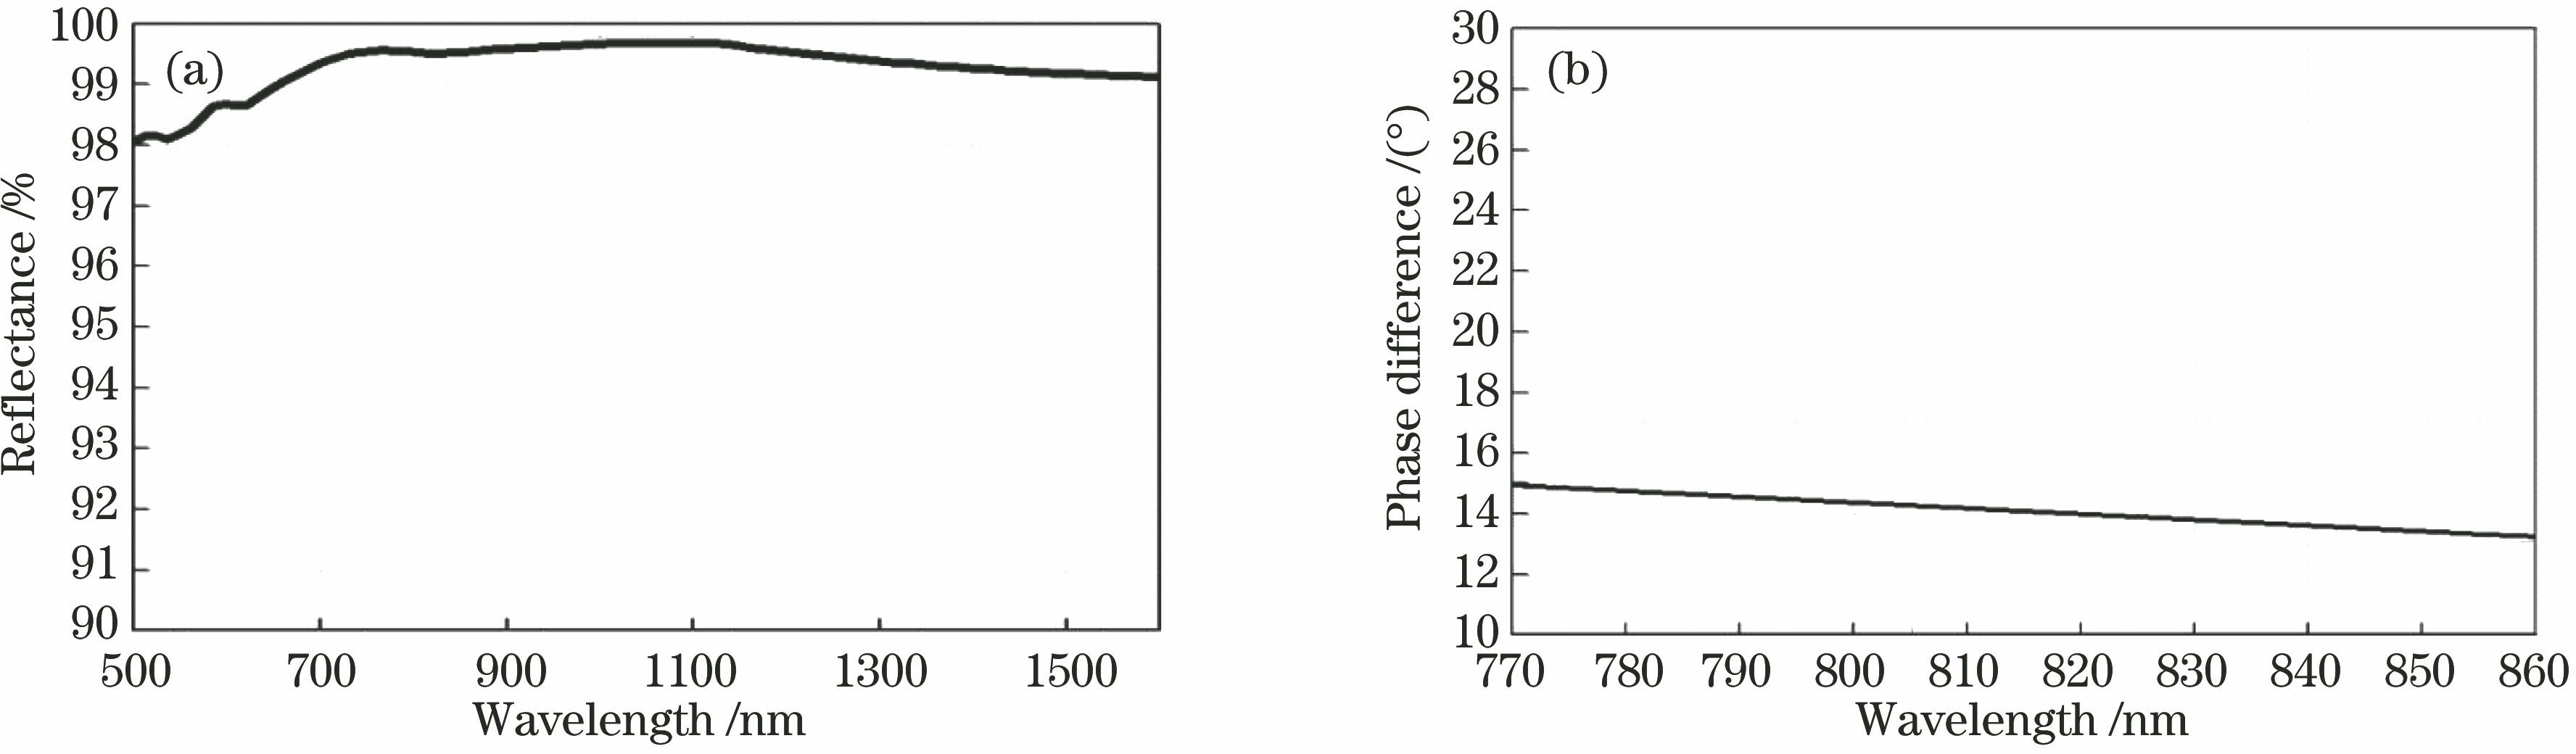 Design result of Ag. (a) Reflectance curve; (b) phase difference curve